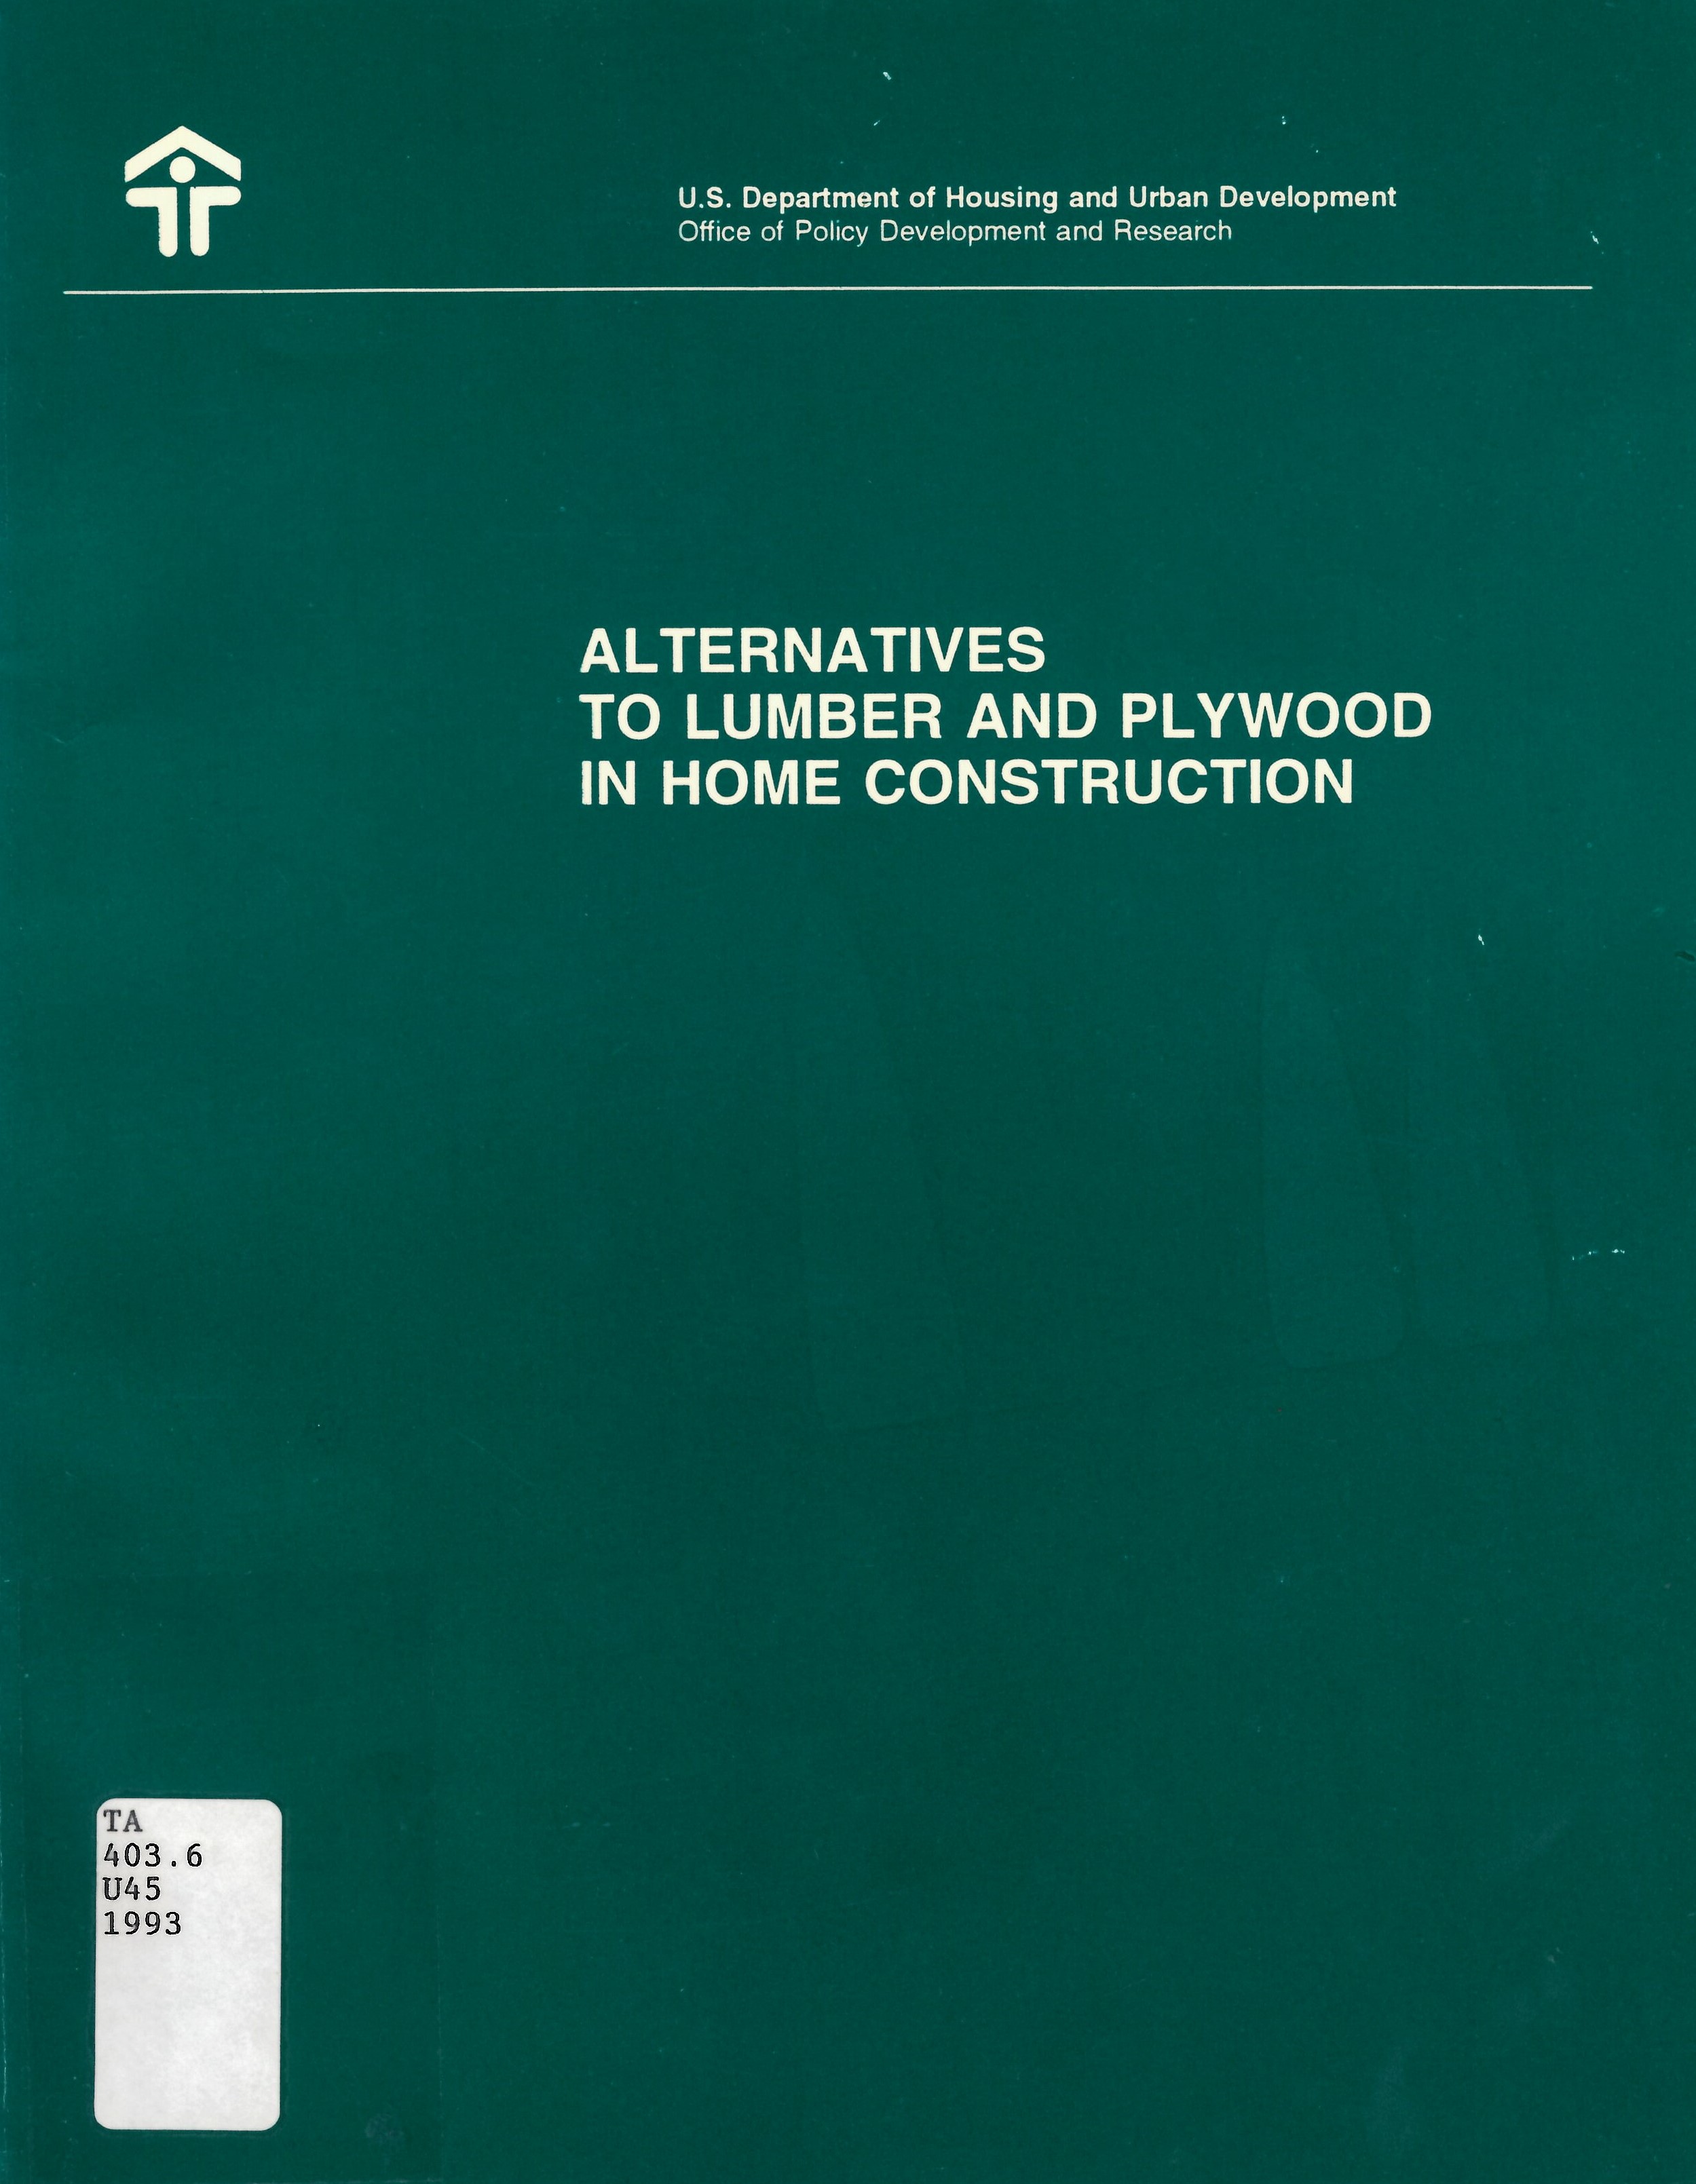 Alternatives to lumber and plywood in home construction